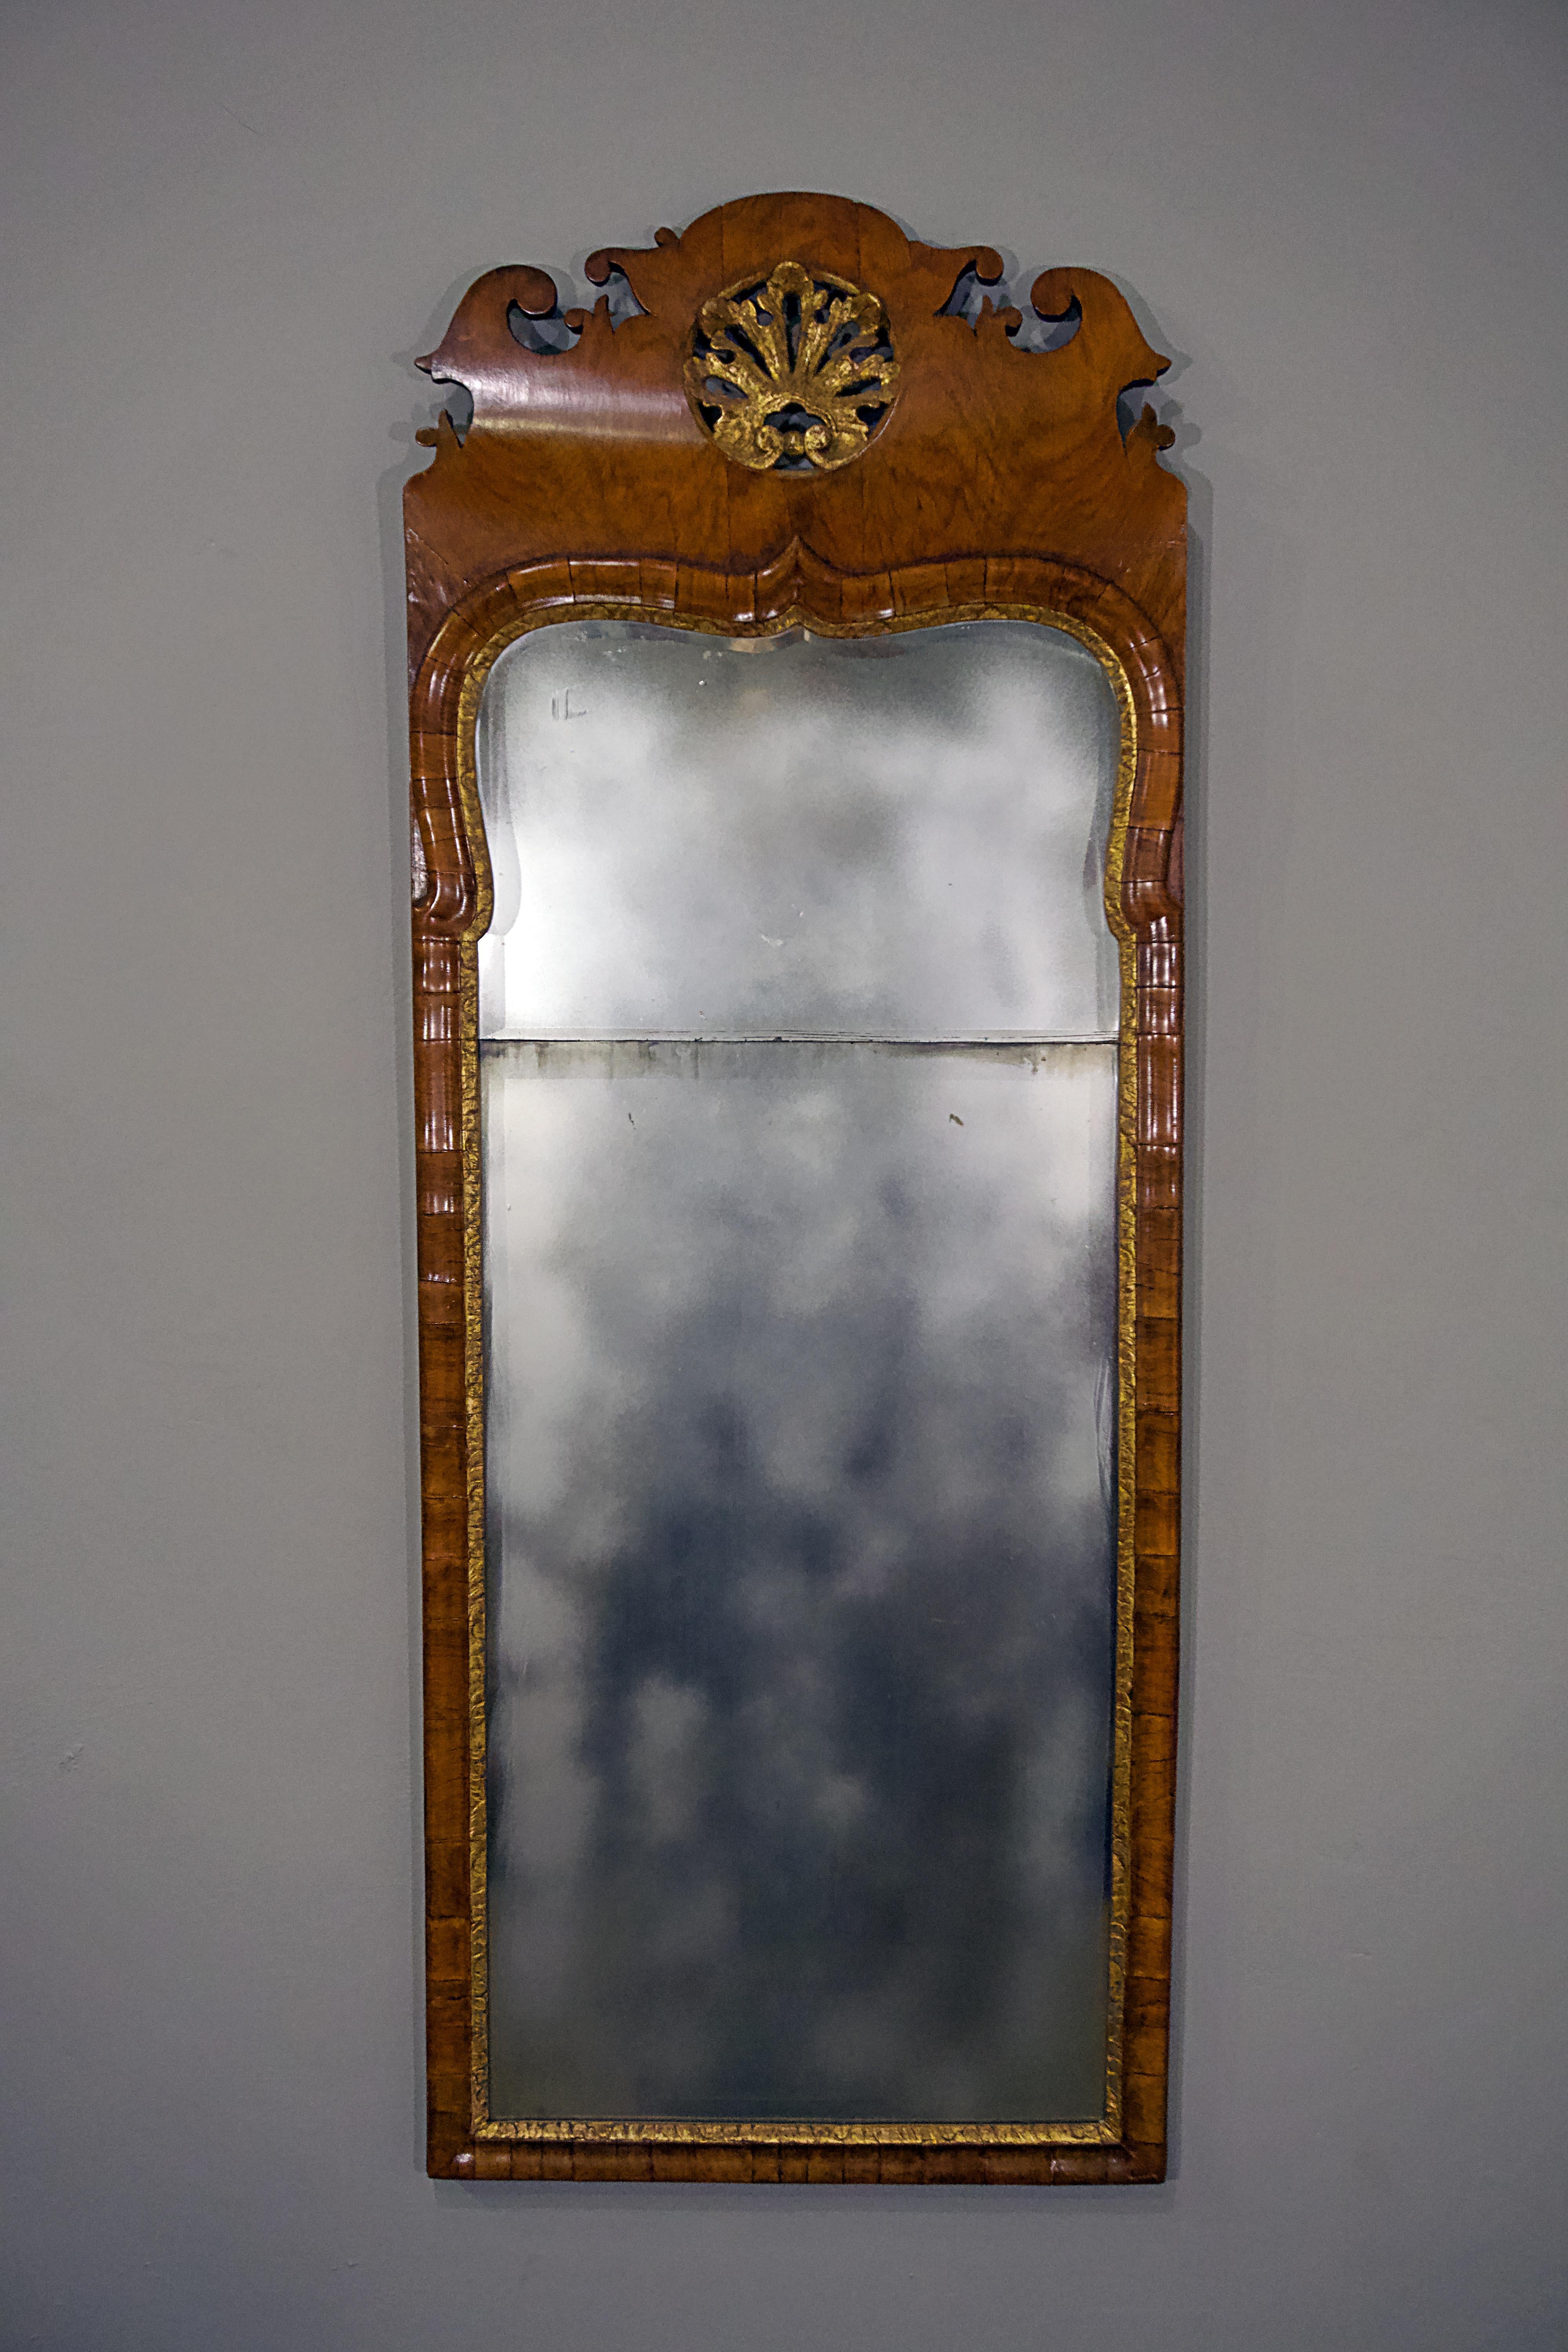 Queen Anne walnut parcel gilt mirror English, circa 1710. Dulling spray added for photo purposes only.